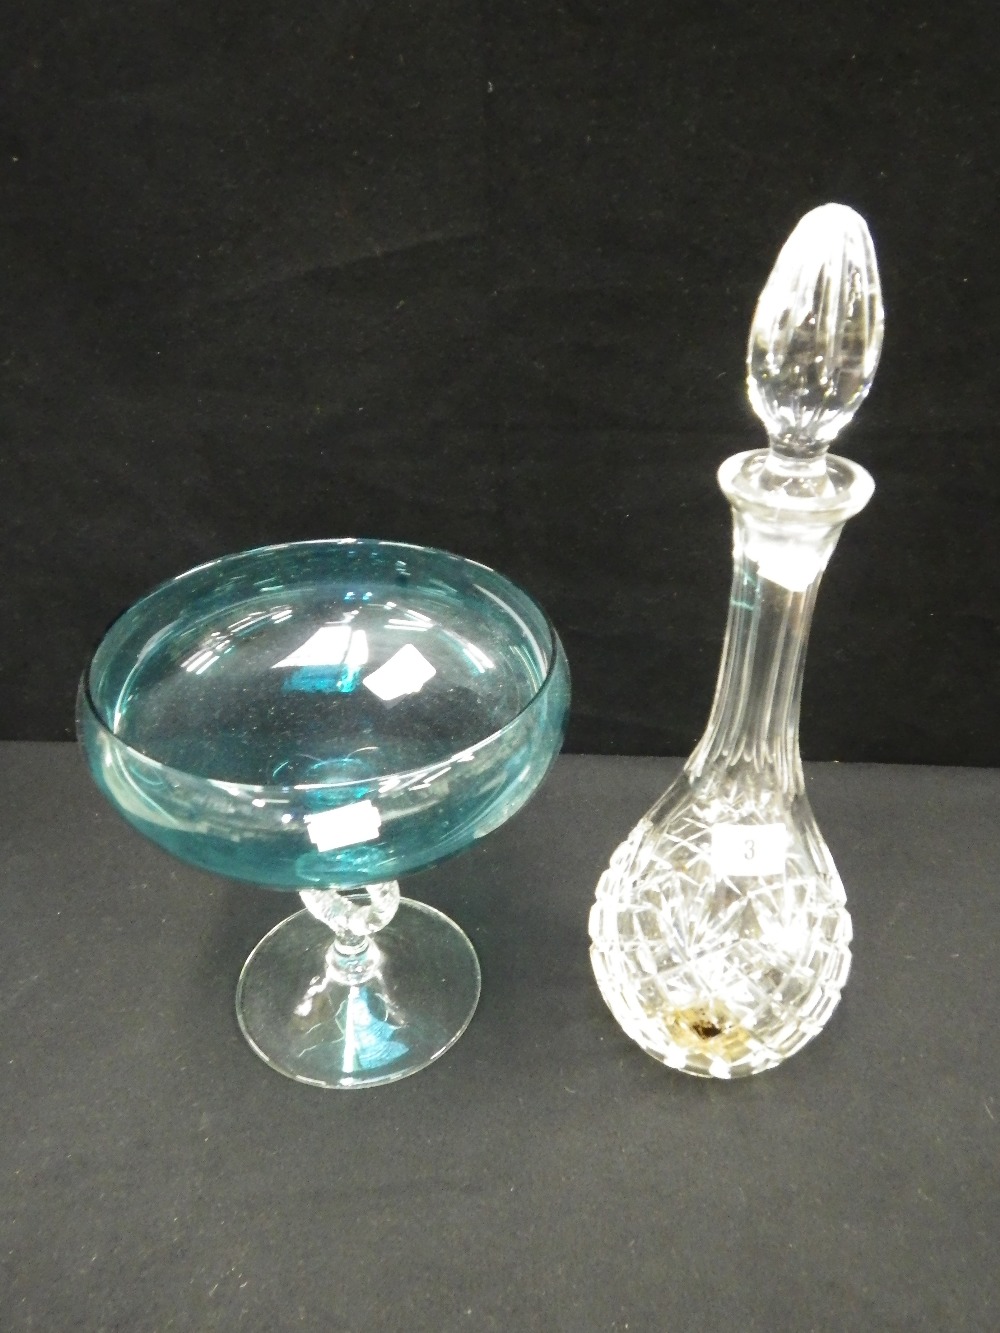 A cut-glass decanter and a green aquamarine footed bowl